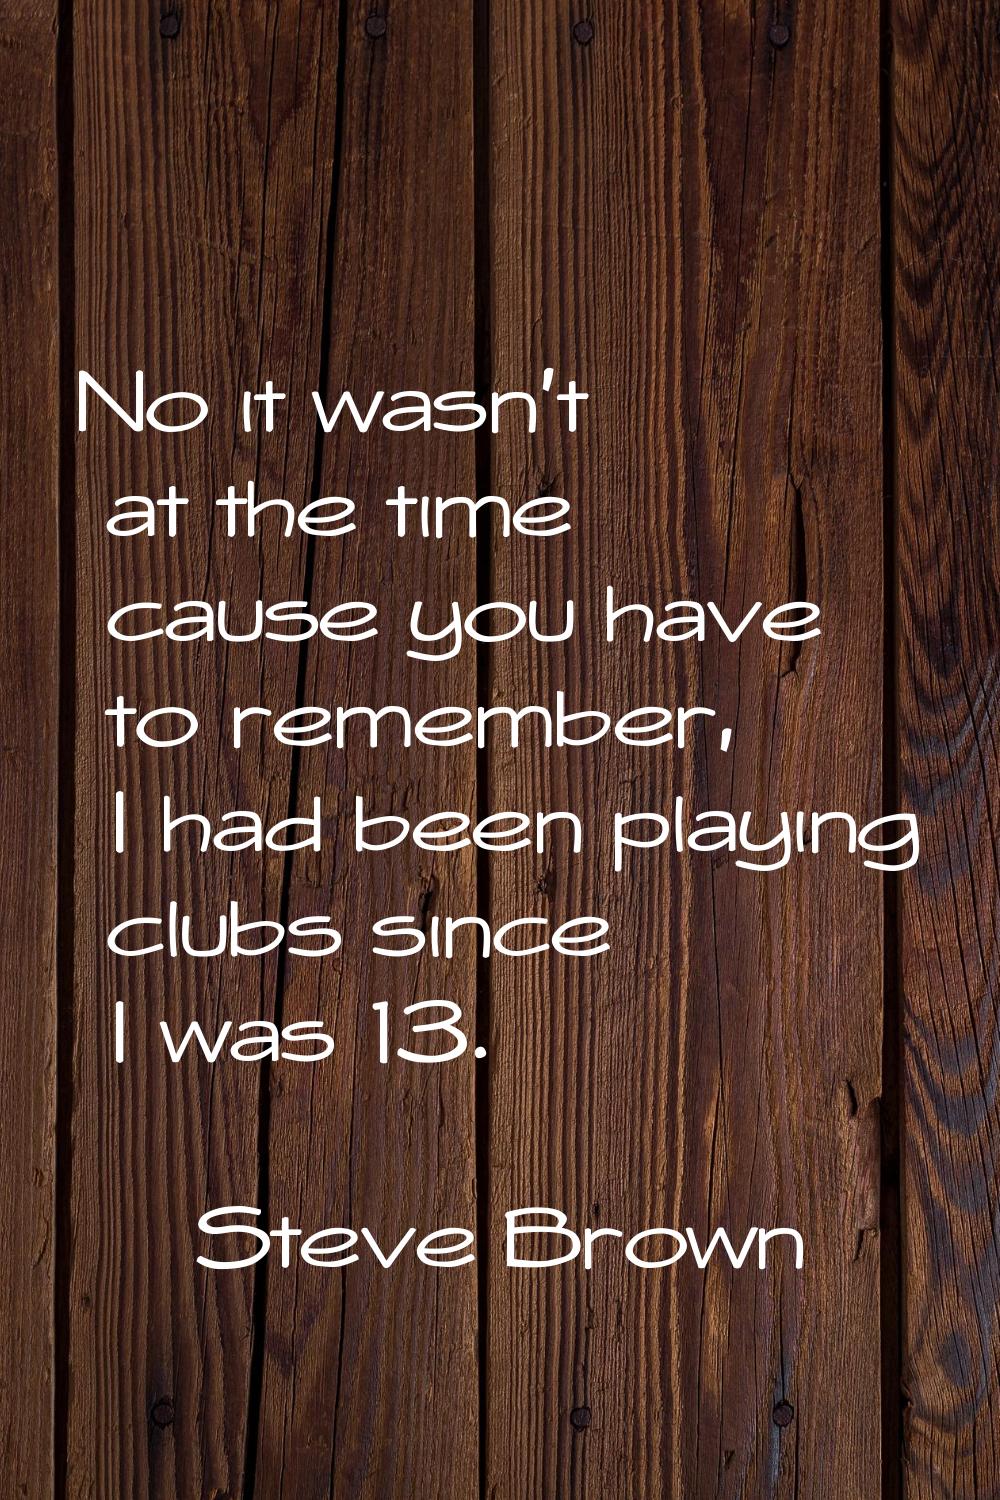 No it wasn't at the time cause you have to remember, I had been playing clubs since I was 13.